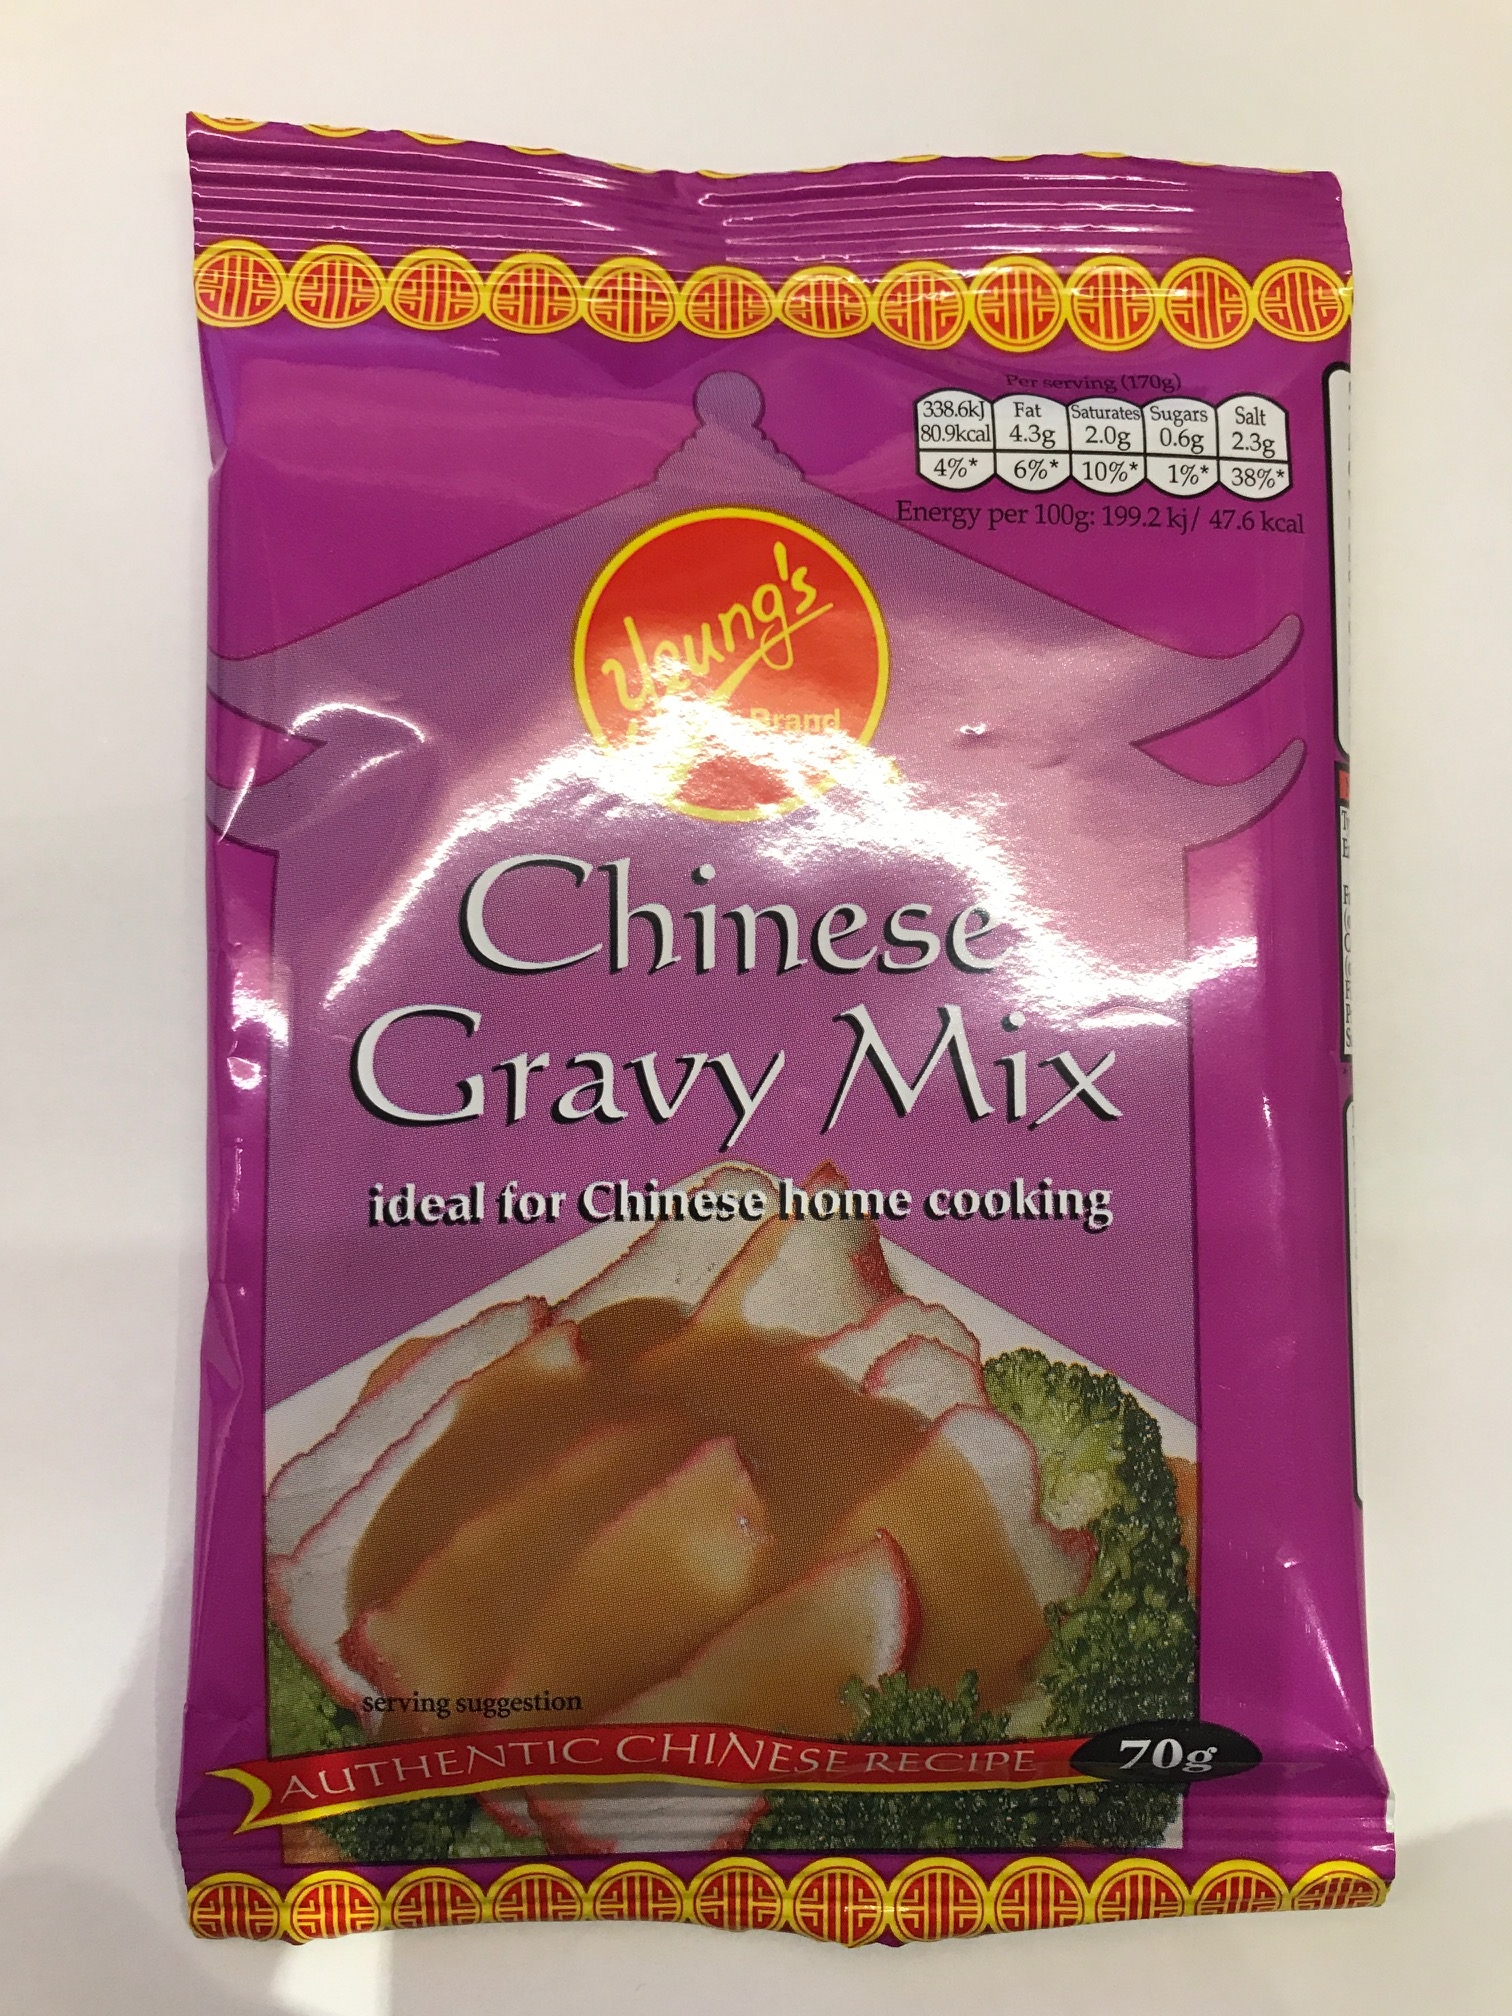 Yeung's Chinese Gravy Mix (ideal for Chinese home cooking) - 70g (2 Packs) 